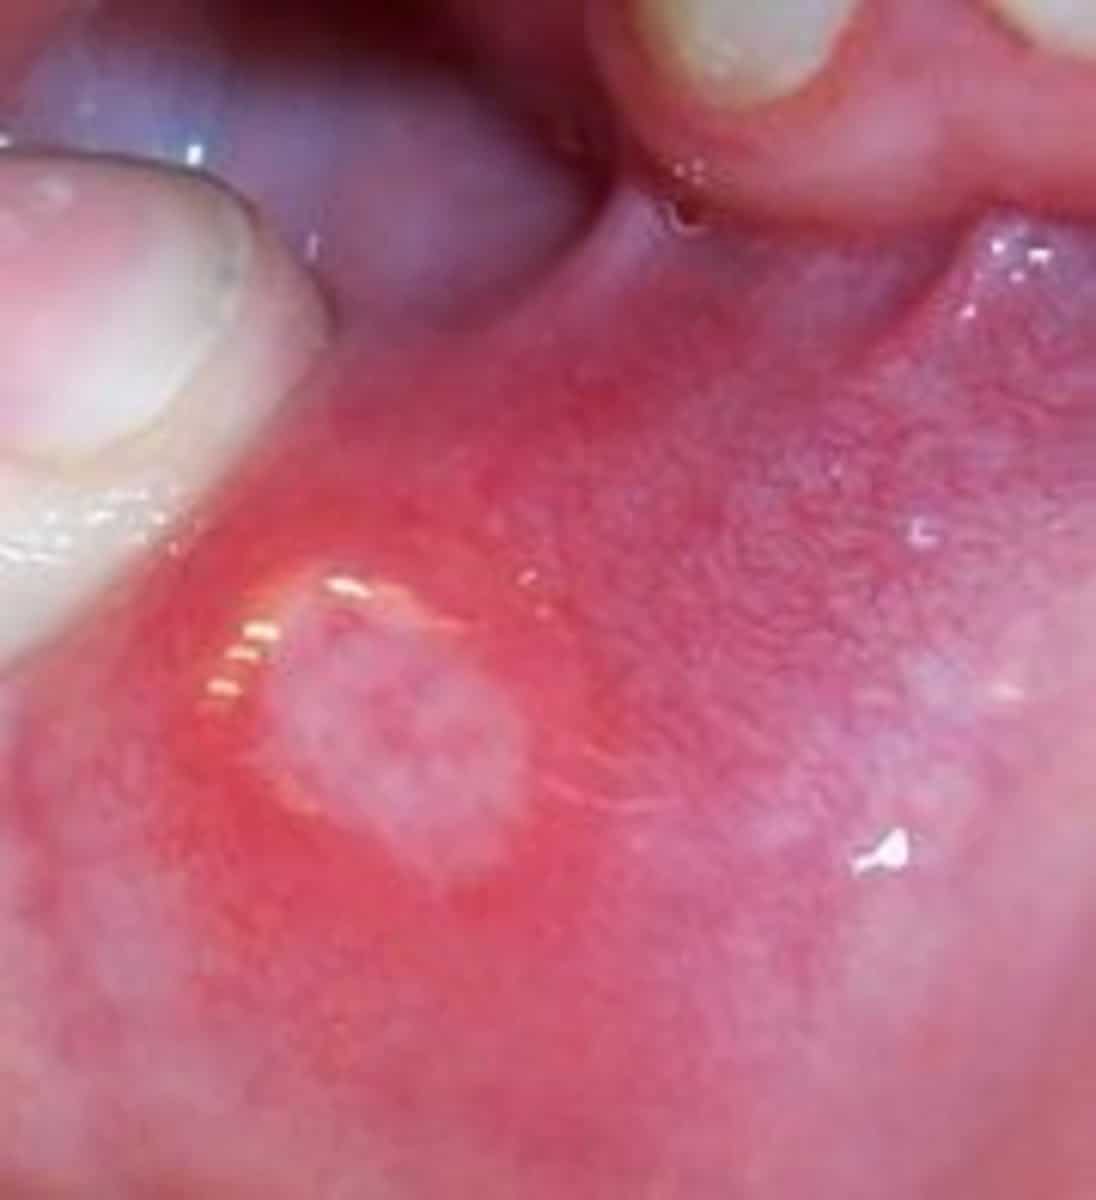 Medicine, Treatment and Prevention of Mouth Ulcers